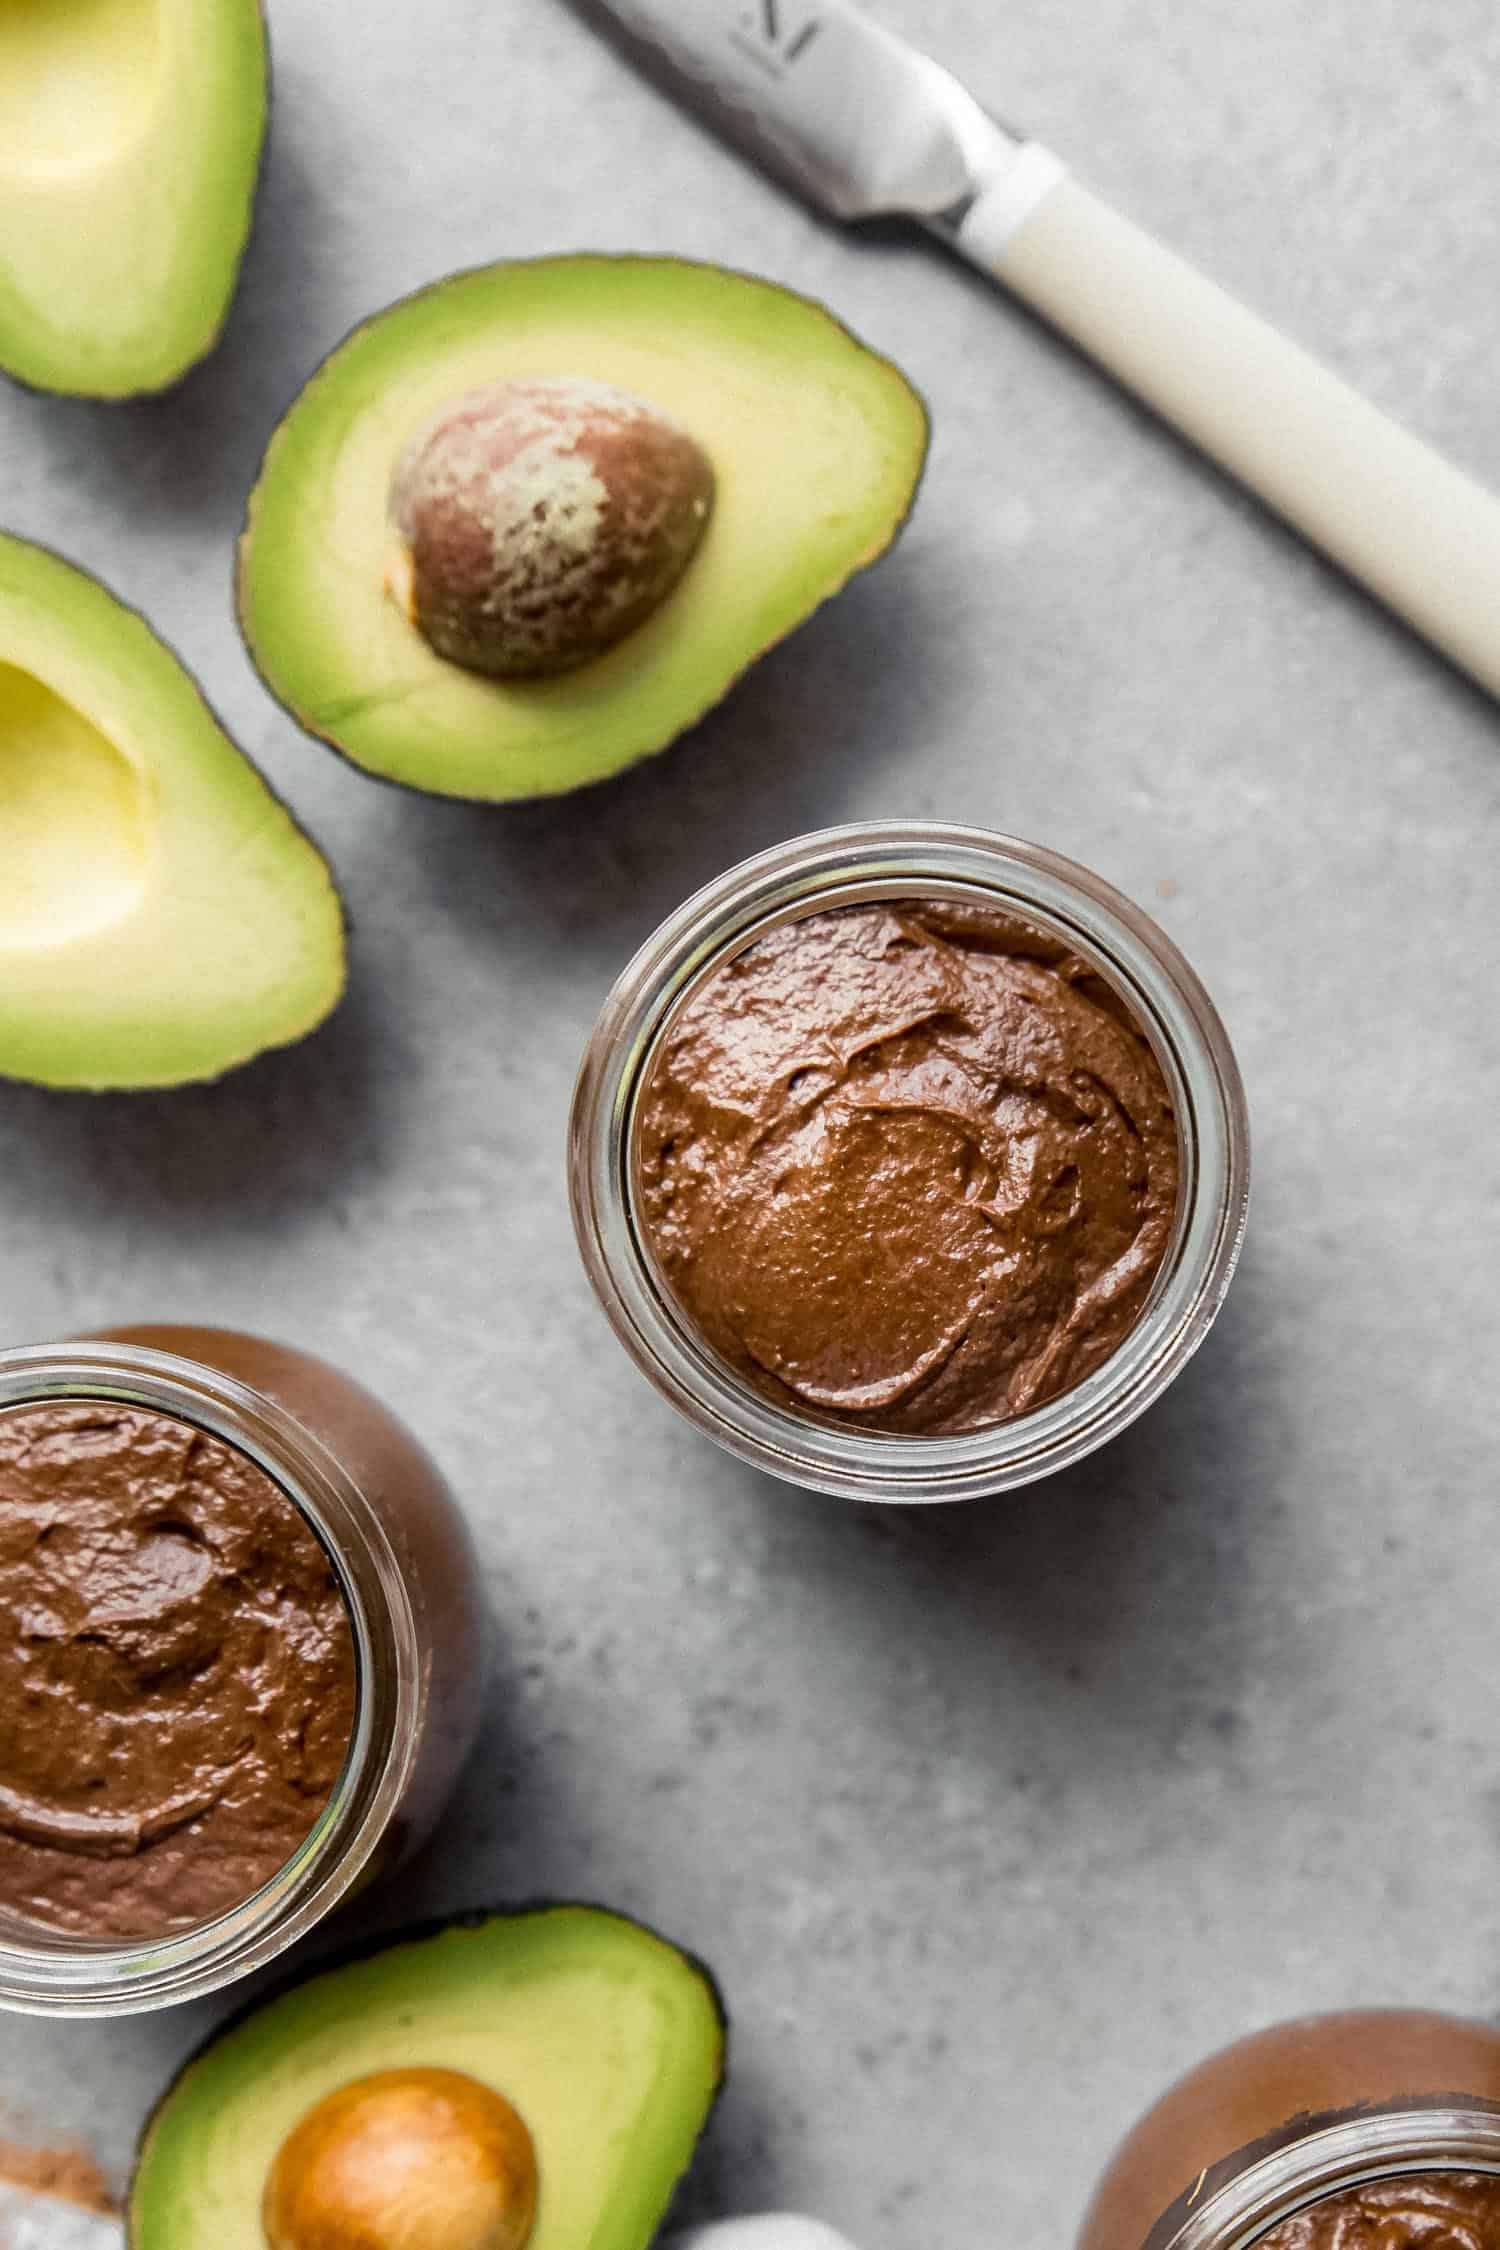 creamy chocolate pudding in glass jars with avocados